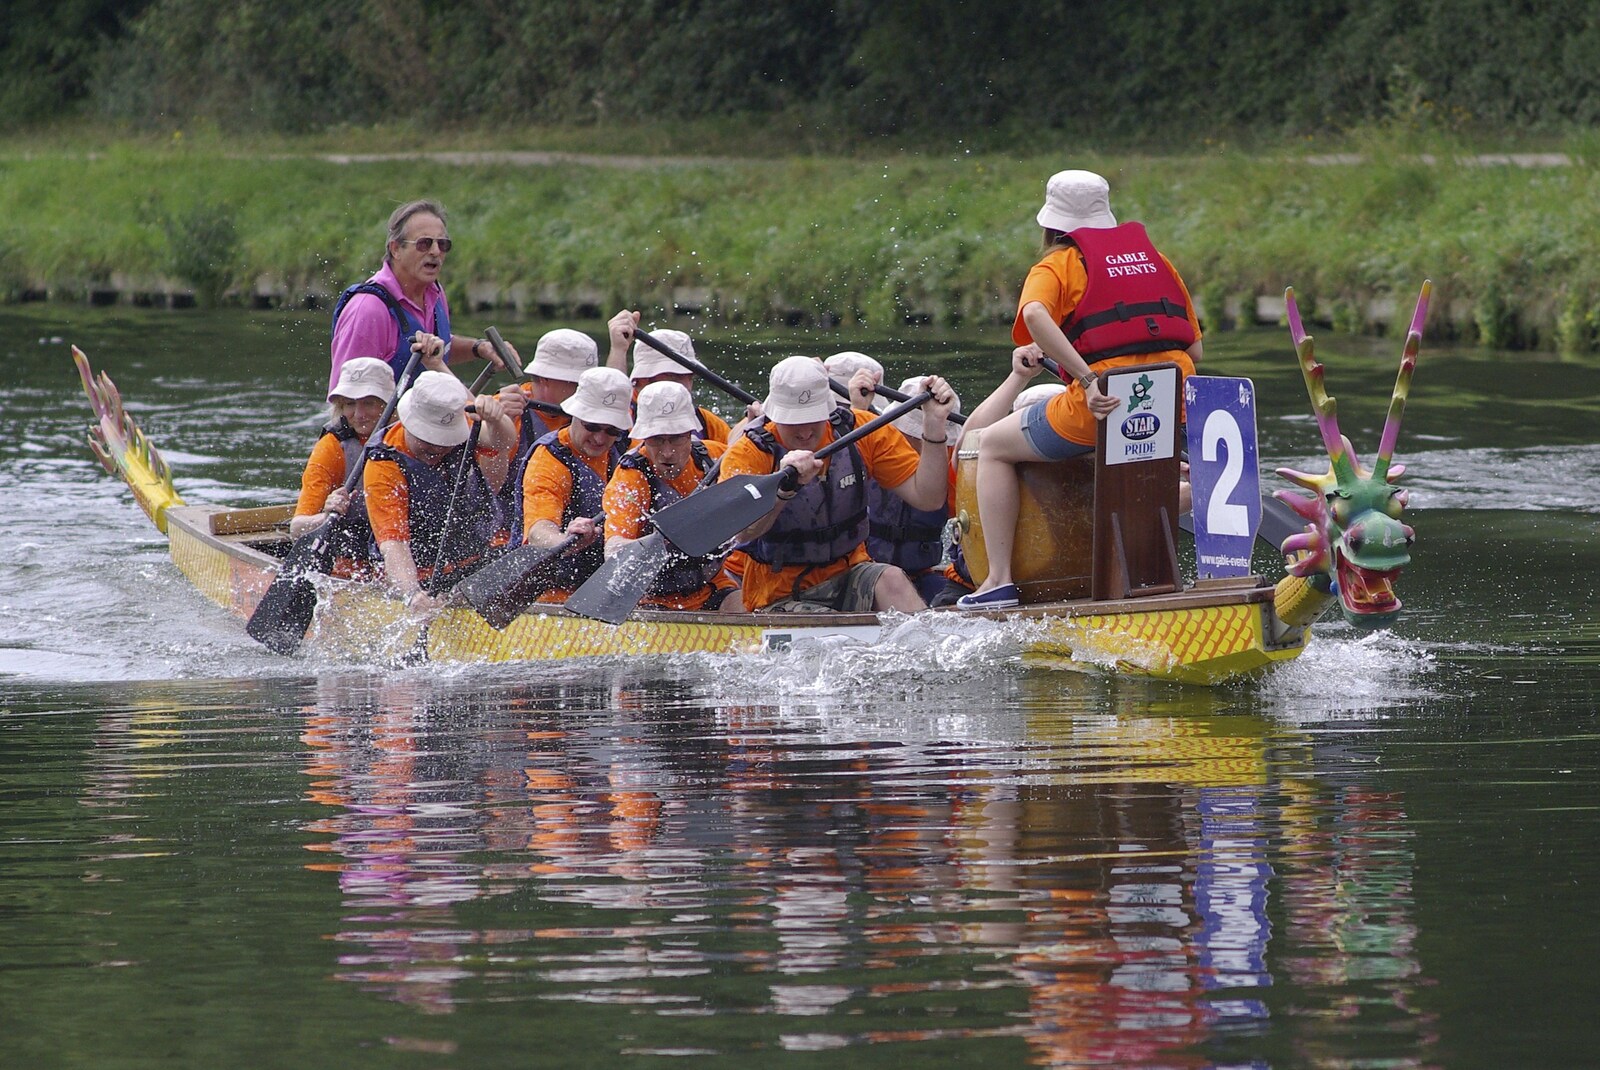 Qualcomm's Dragon-Boat Racing, Fen Ditton, Cambridge - 8th September 2007: A mass of paddling and spray